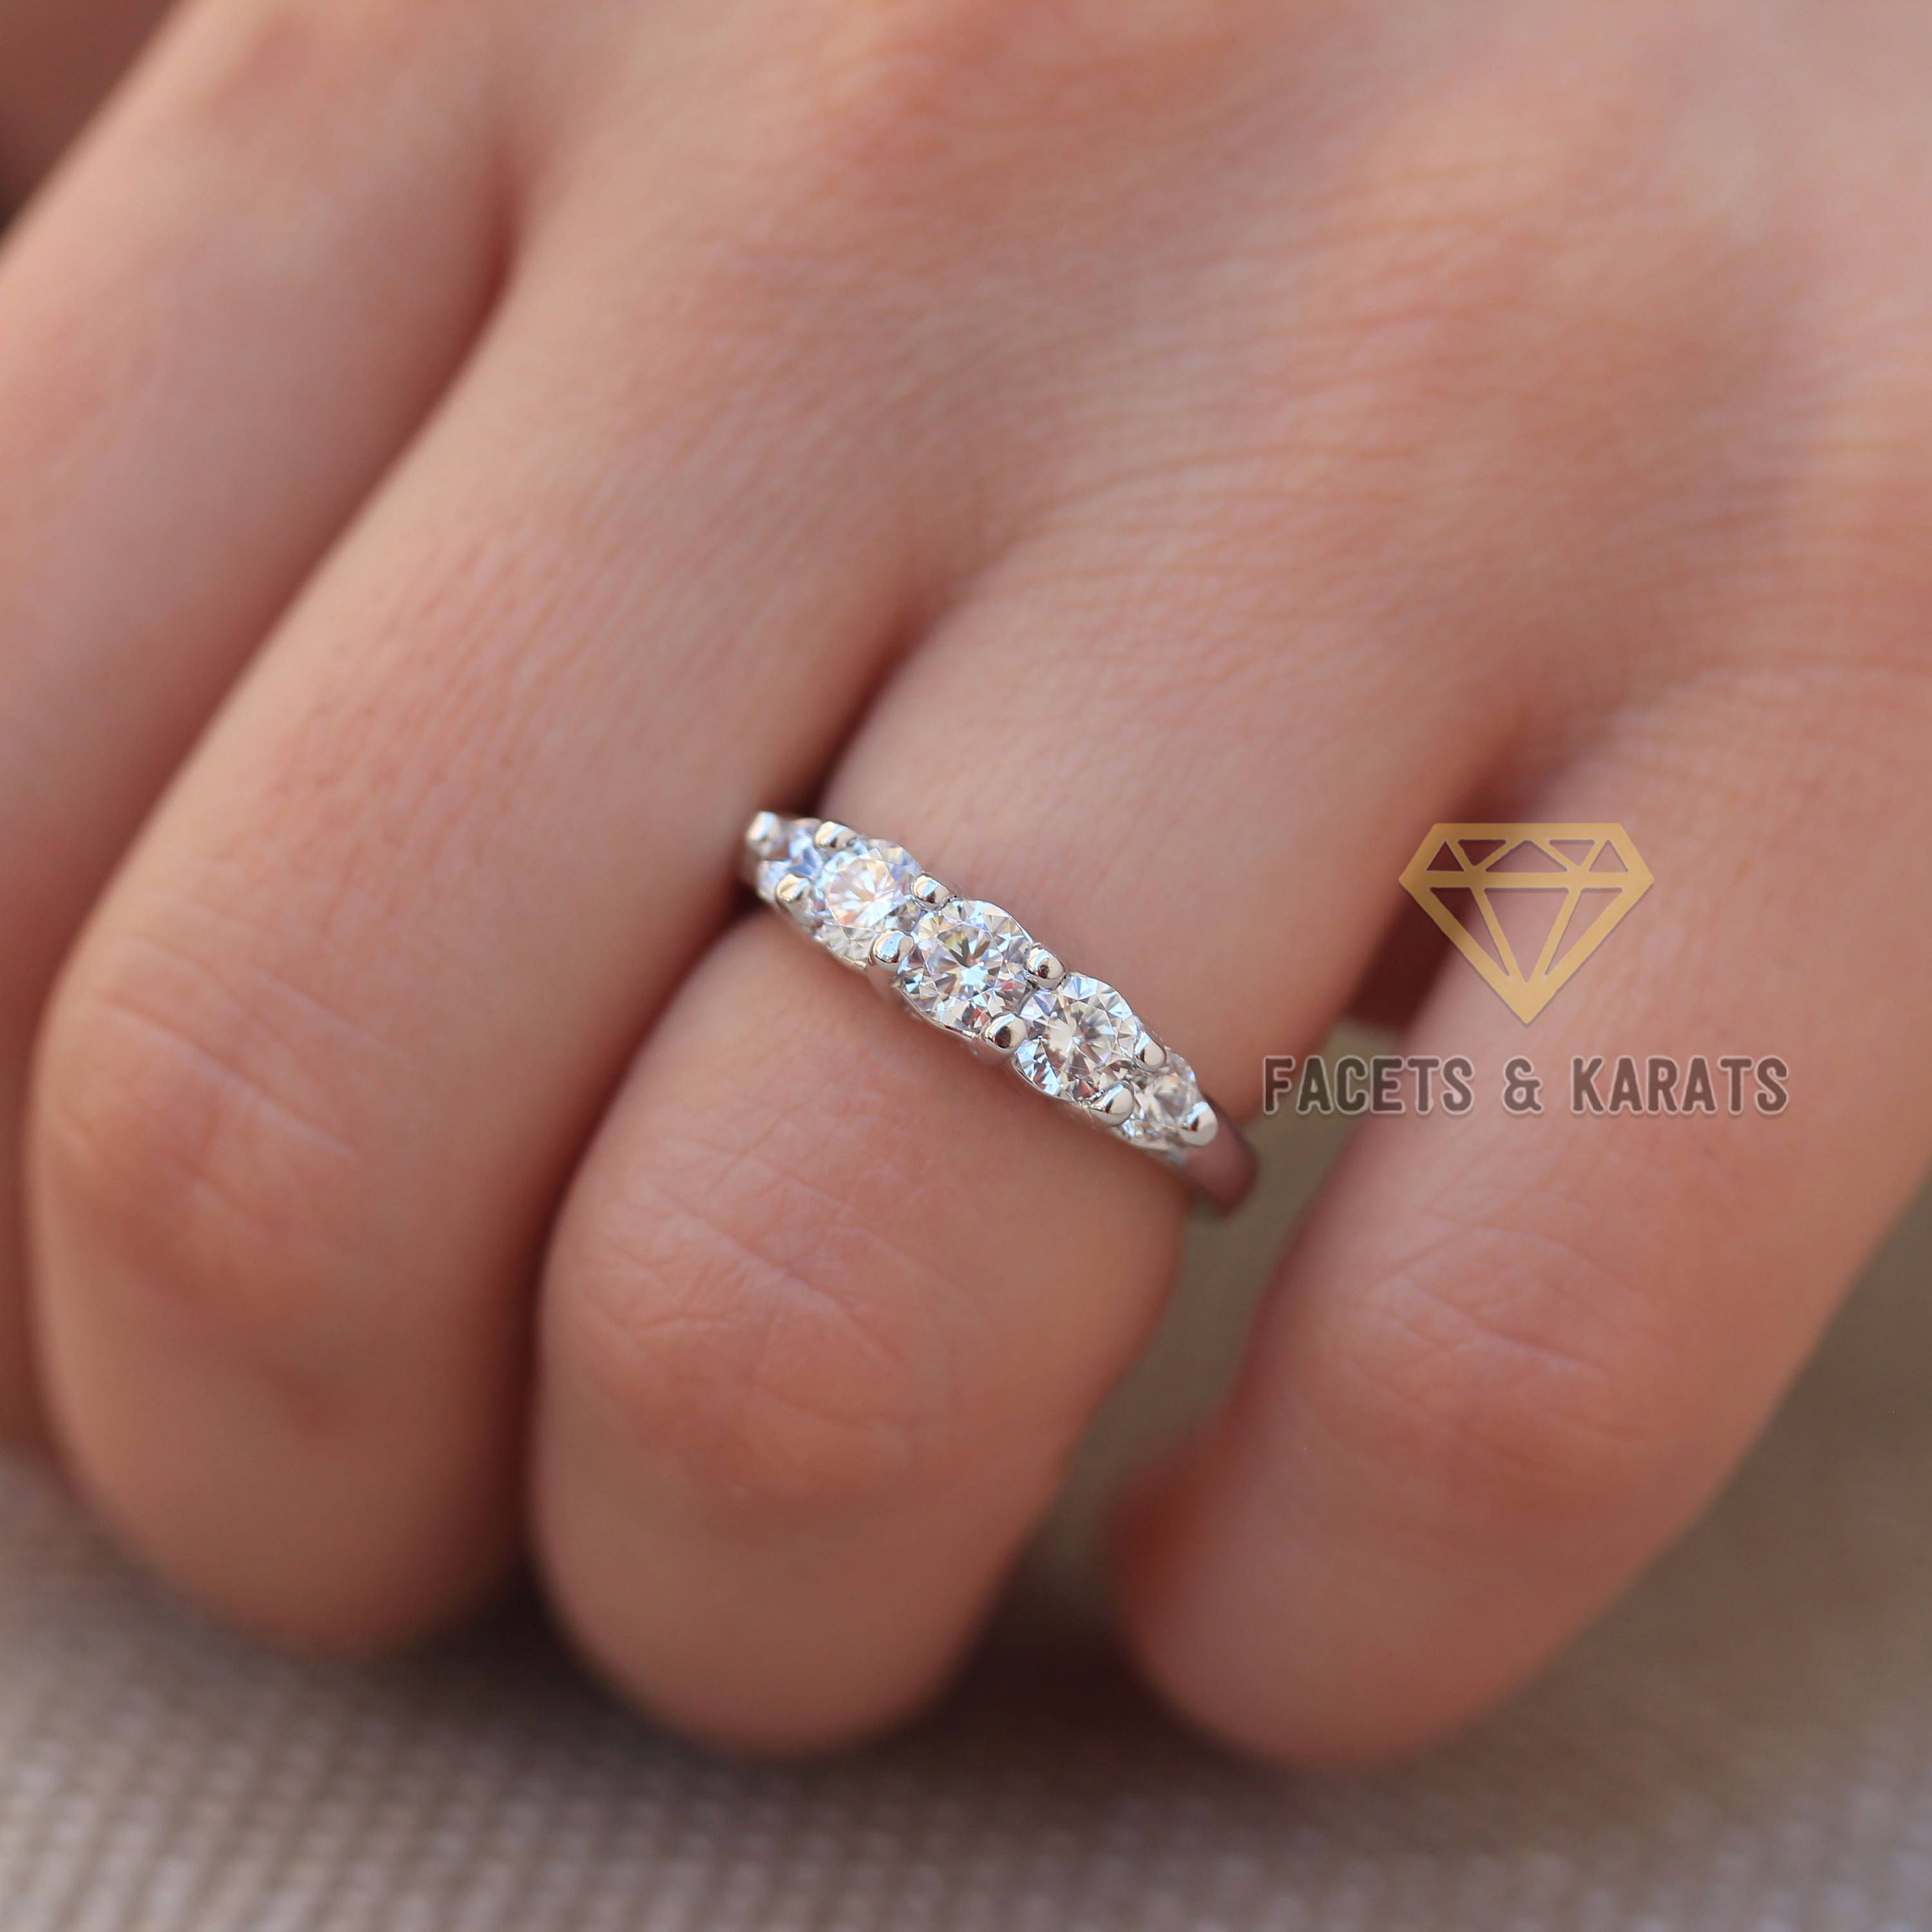 5 Stone Diamond Ring 1 Carat 14k Solid White Gold Five Stone Wedding Band  Anniversary Ring Man Made Diamond Simulant Wedding Ring Band With Regard To Most Recent Diamond Five Stone Anniversary Bands In Gold (View 22 of 25)